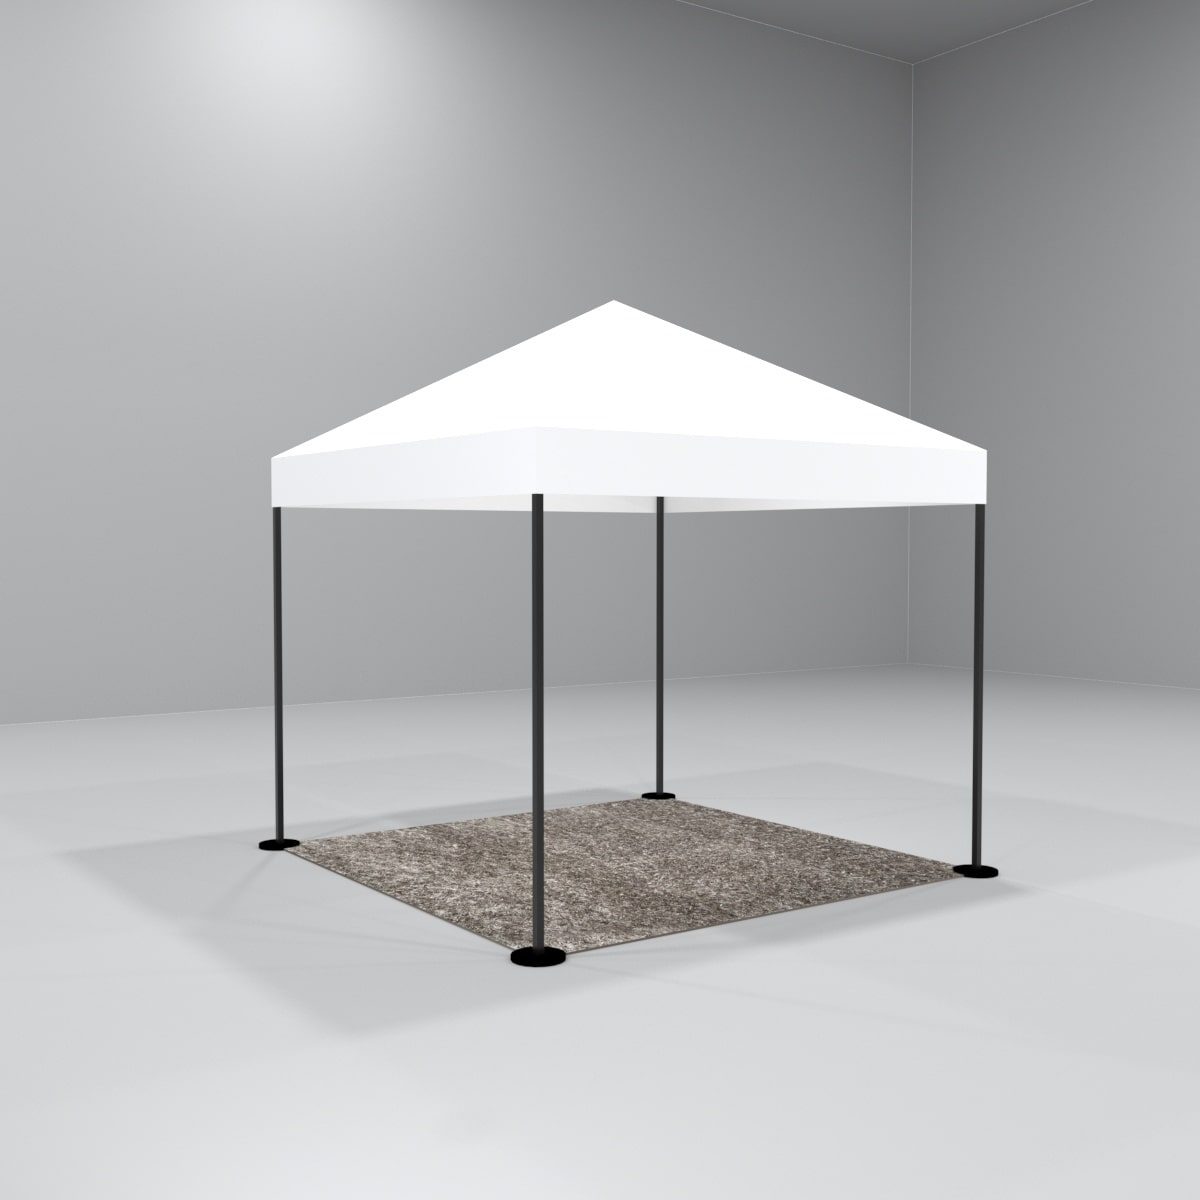 3 x 3 canopy tent